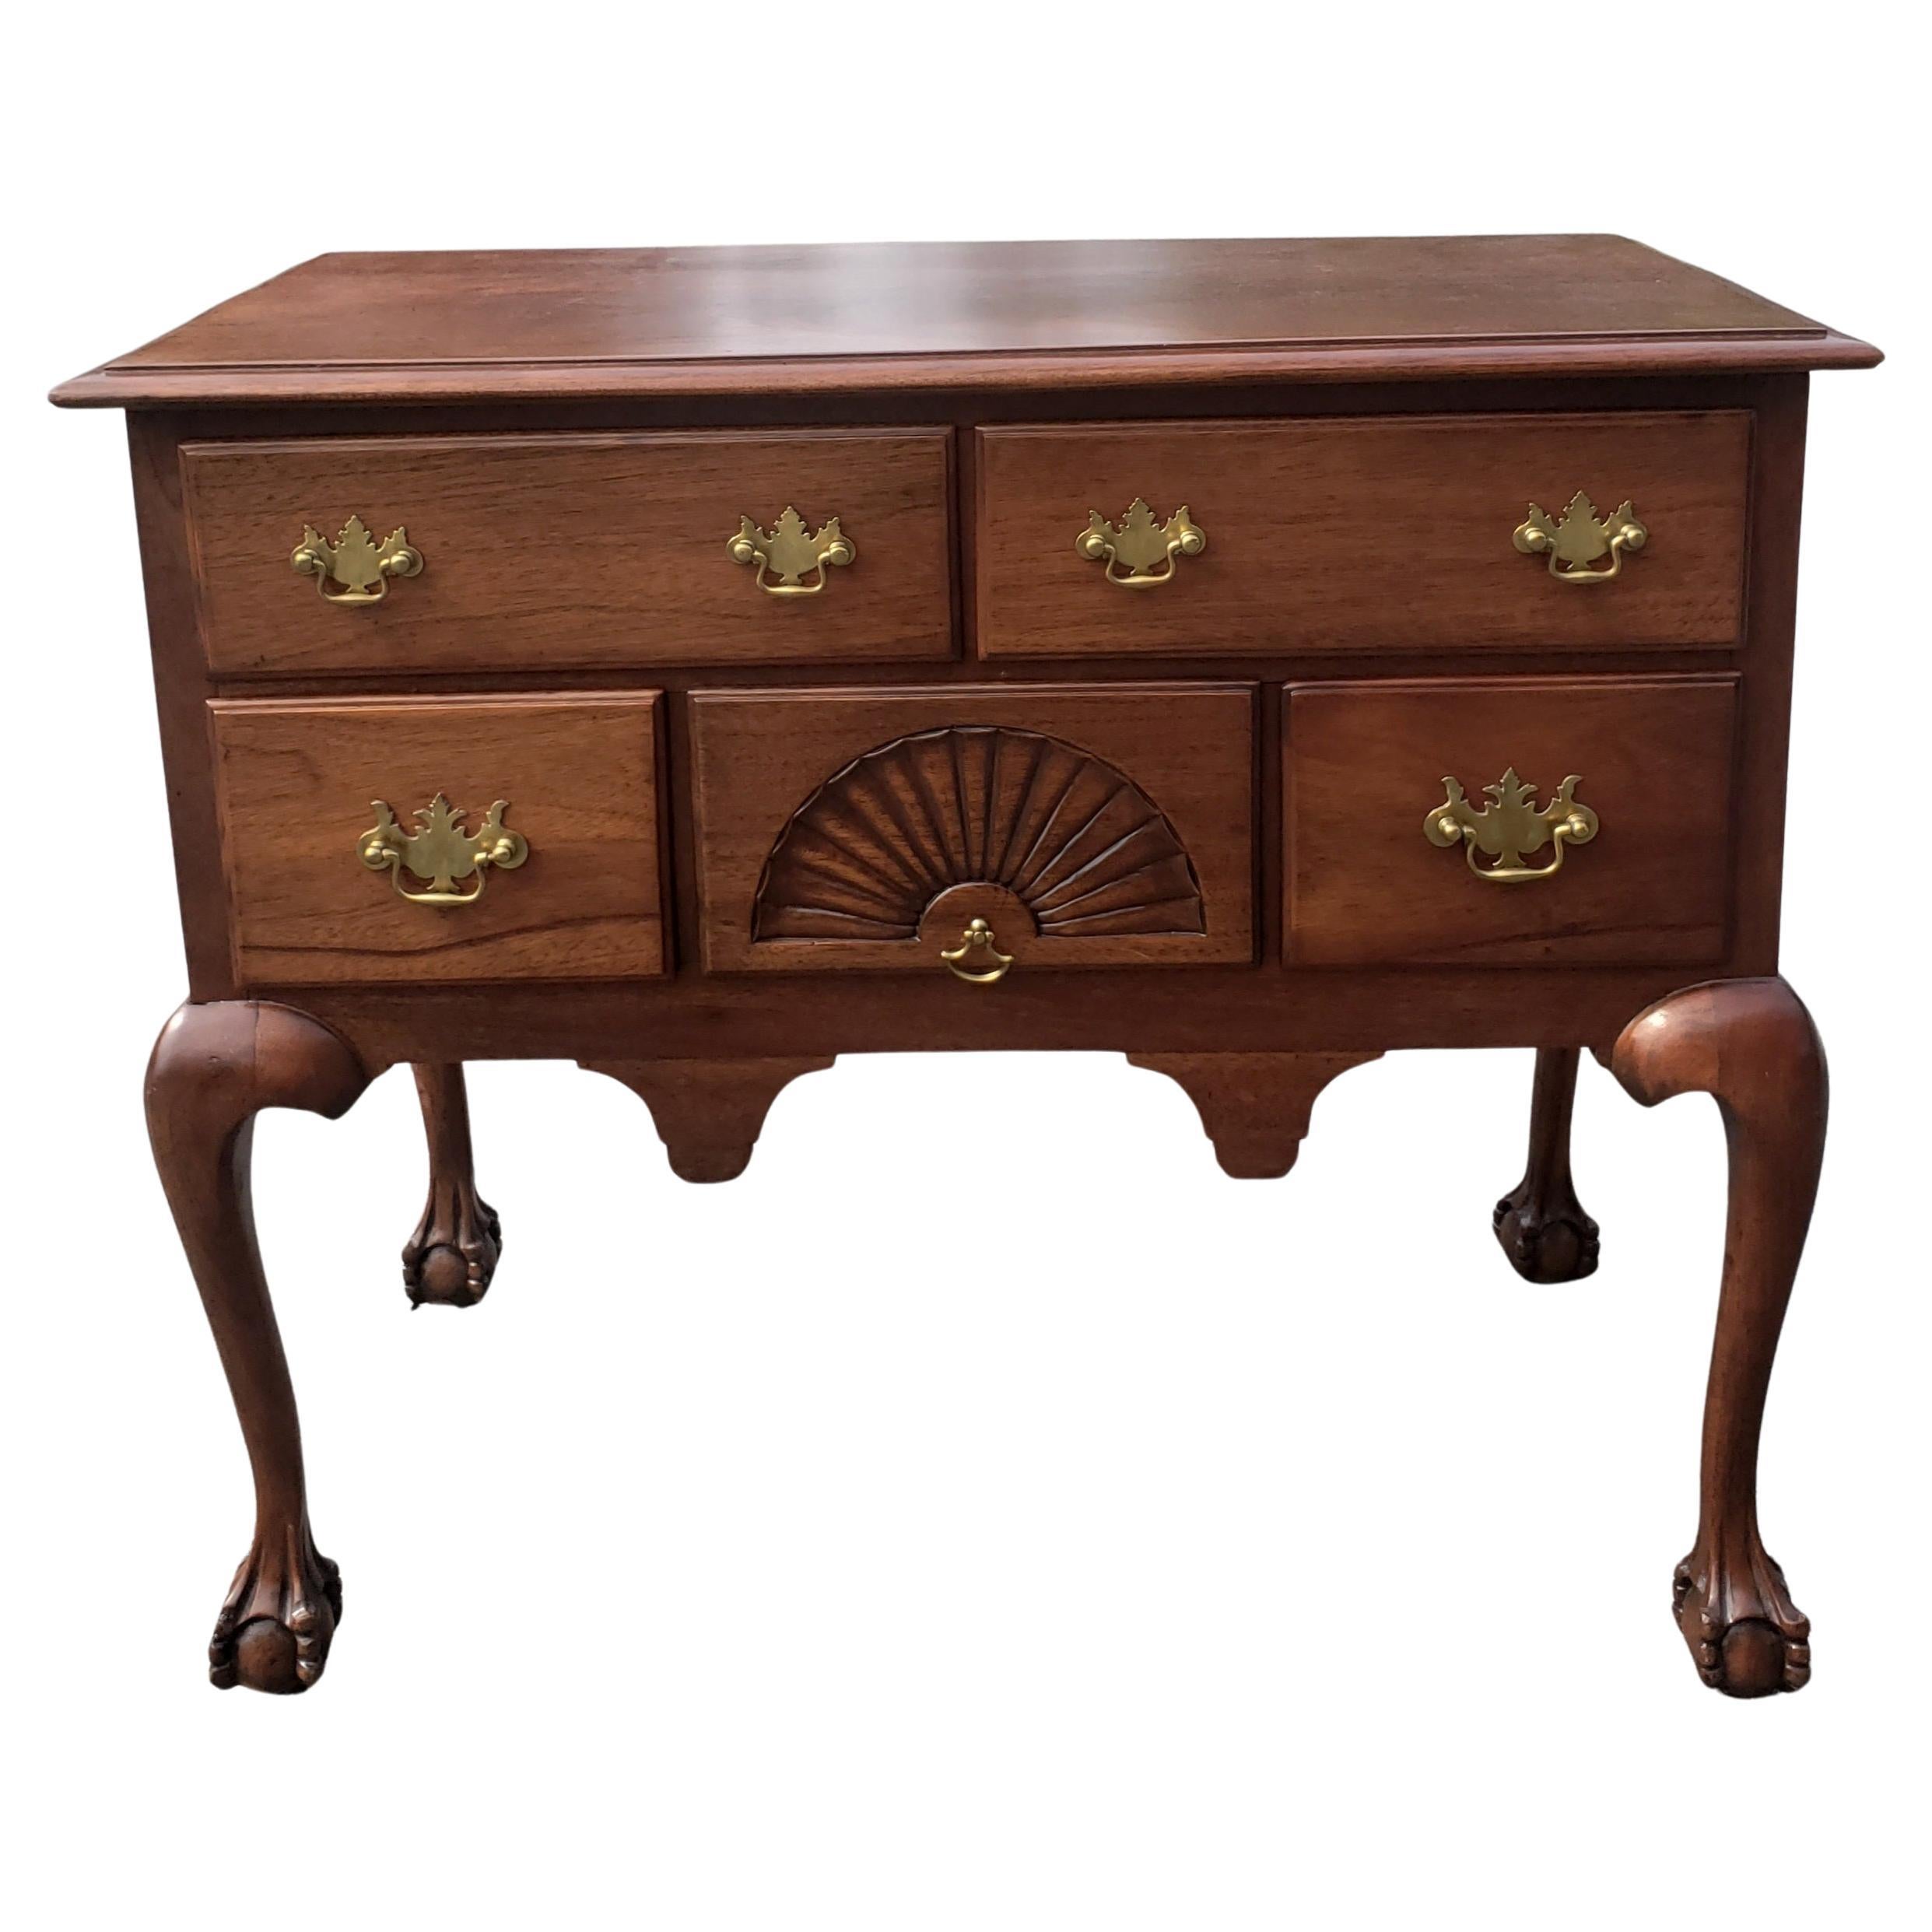 Late 19th Century Chippendale Mahogany Lowboy with Ball and Claw Feet